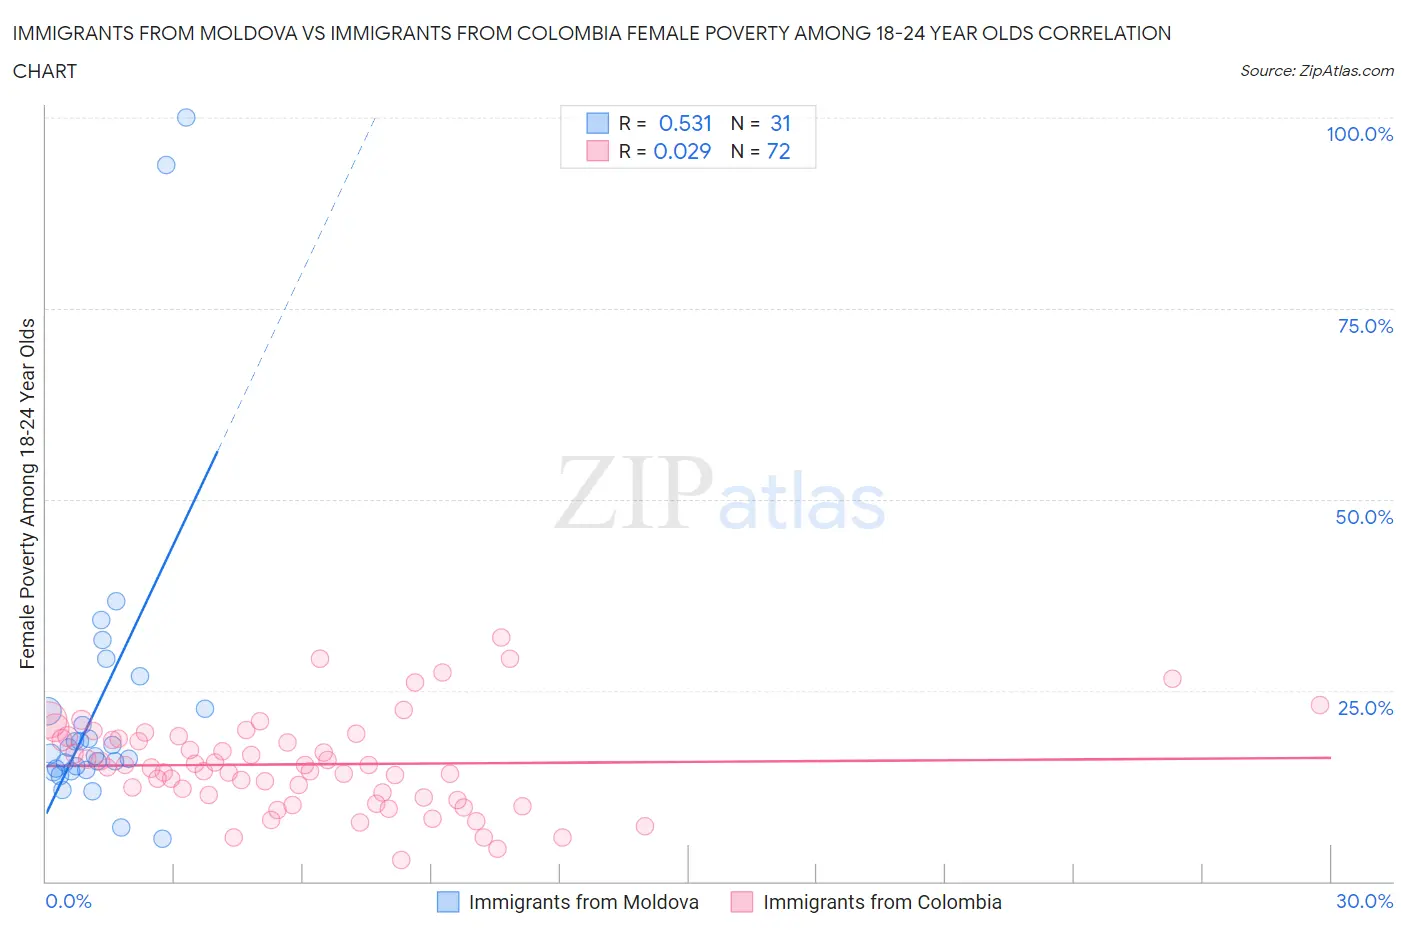 Immigrants from Moldova vs Immigrants from Colombia Female Poverty Among 18-24 Year Olds